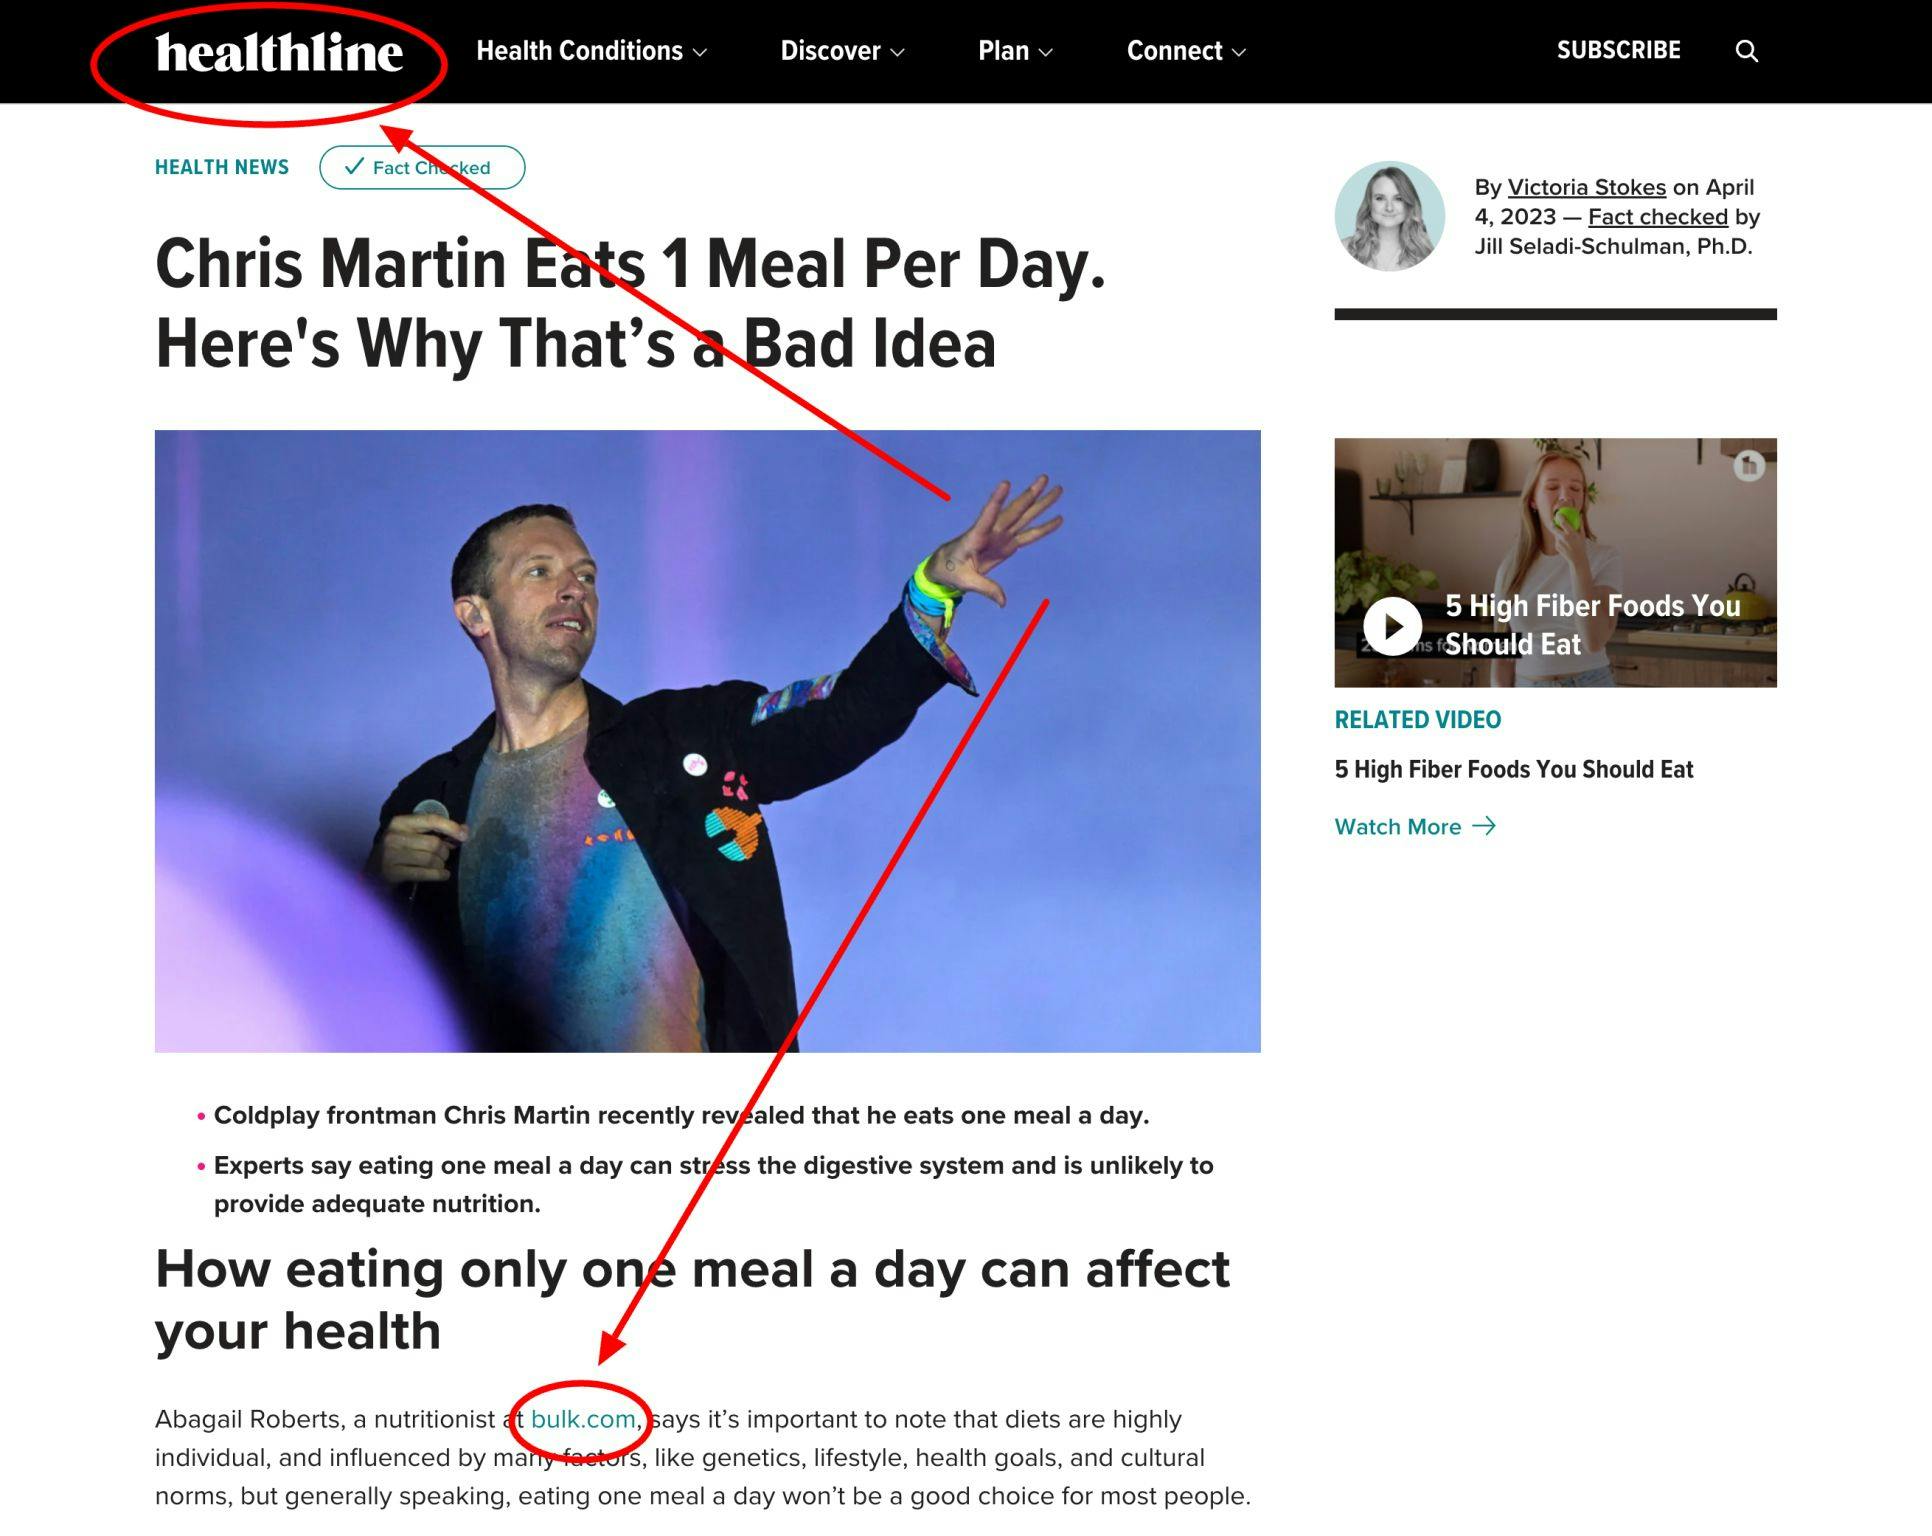 How to Build 40 links in one month with Digital PR for a Nutrition Website